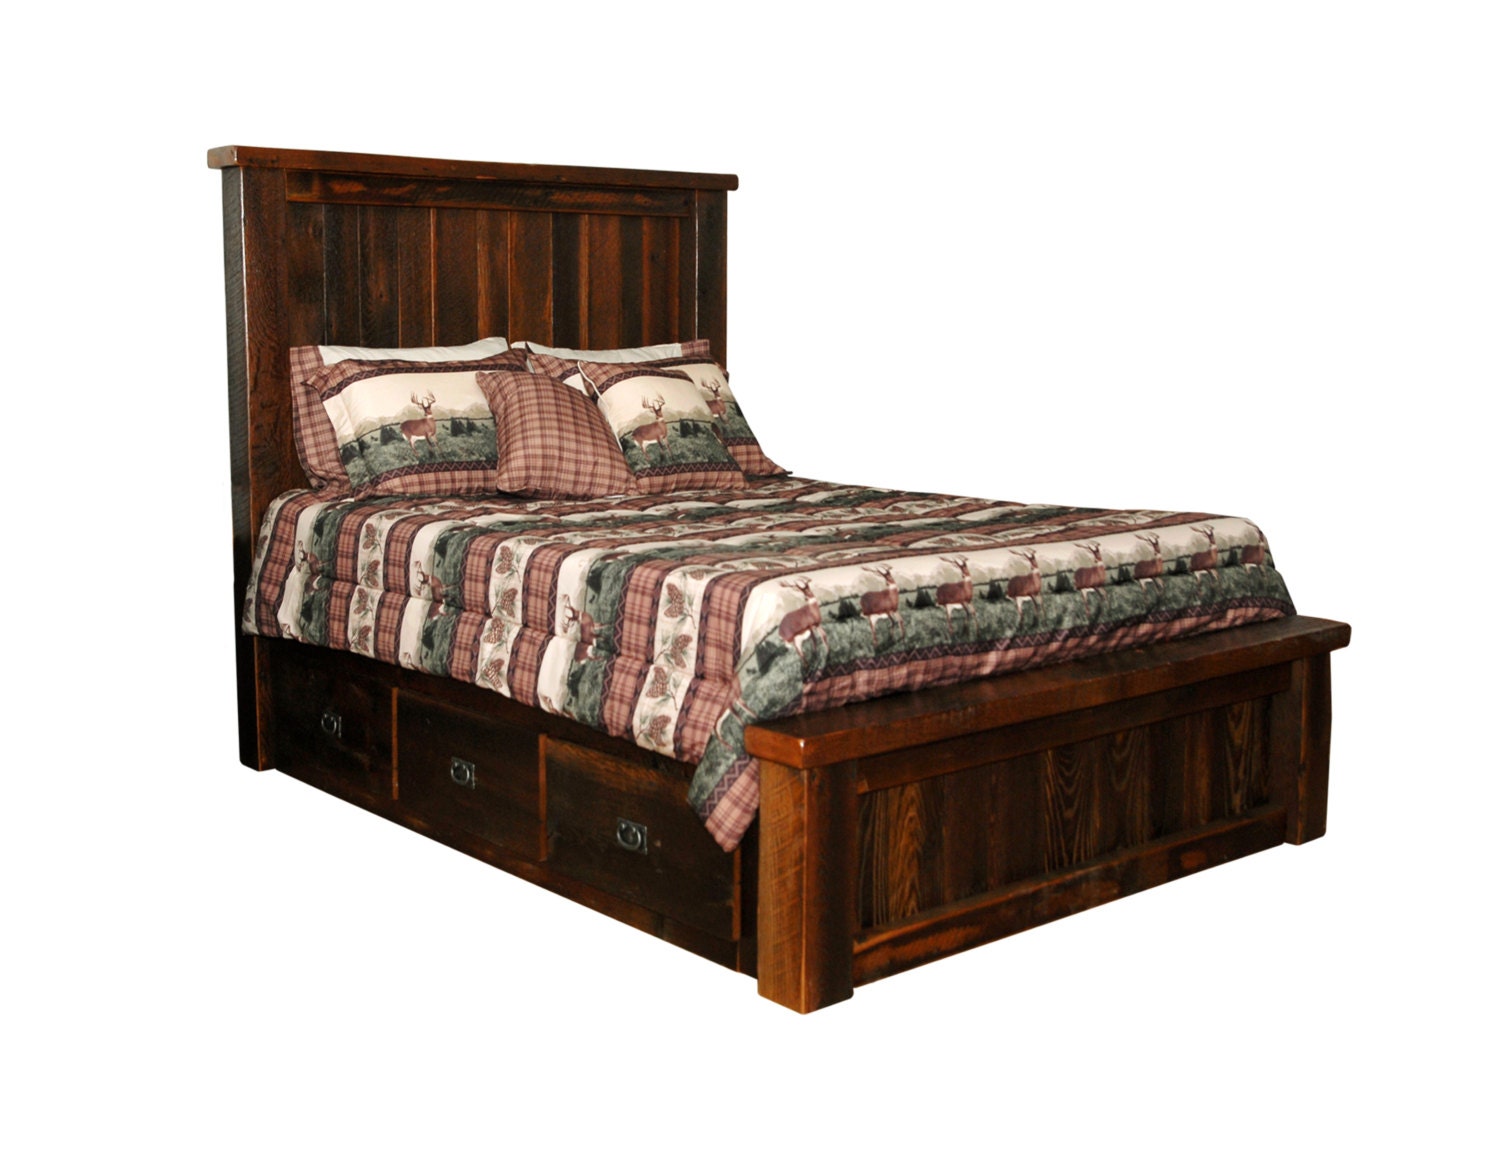 Rustic Reclaimed Barn Wood QUEEN Size Bed Frame with 6